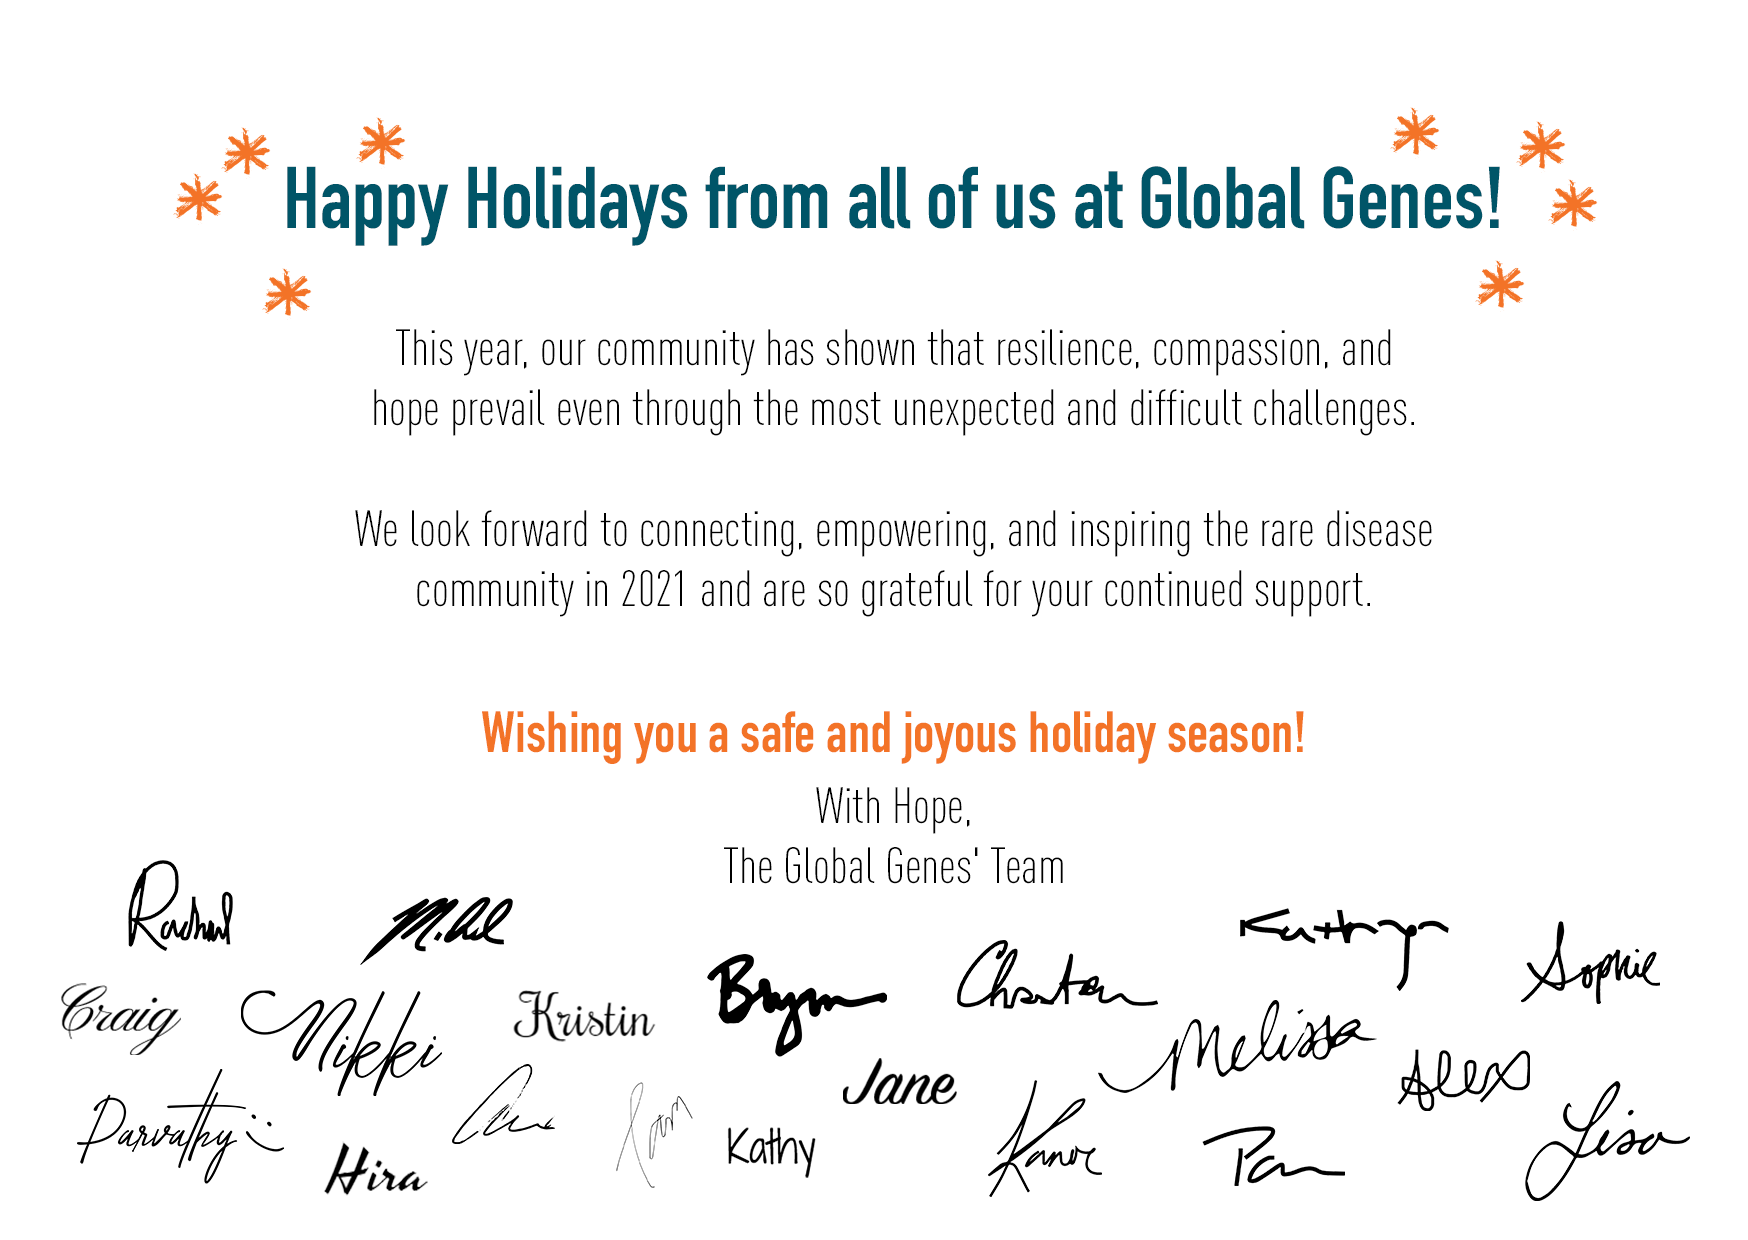 Happy Holidays from Global Genes